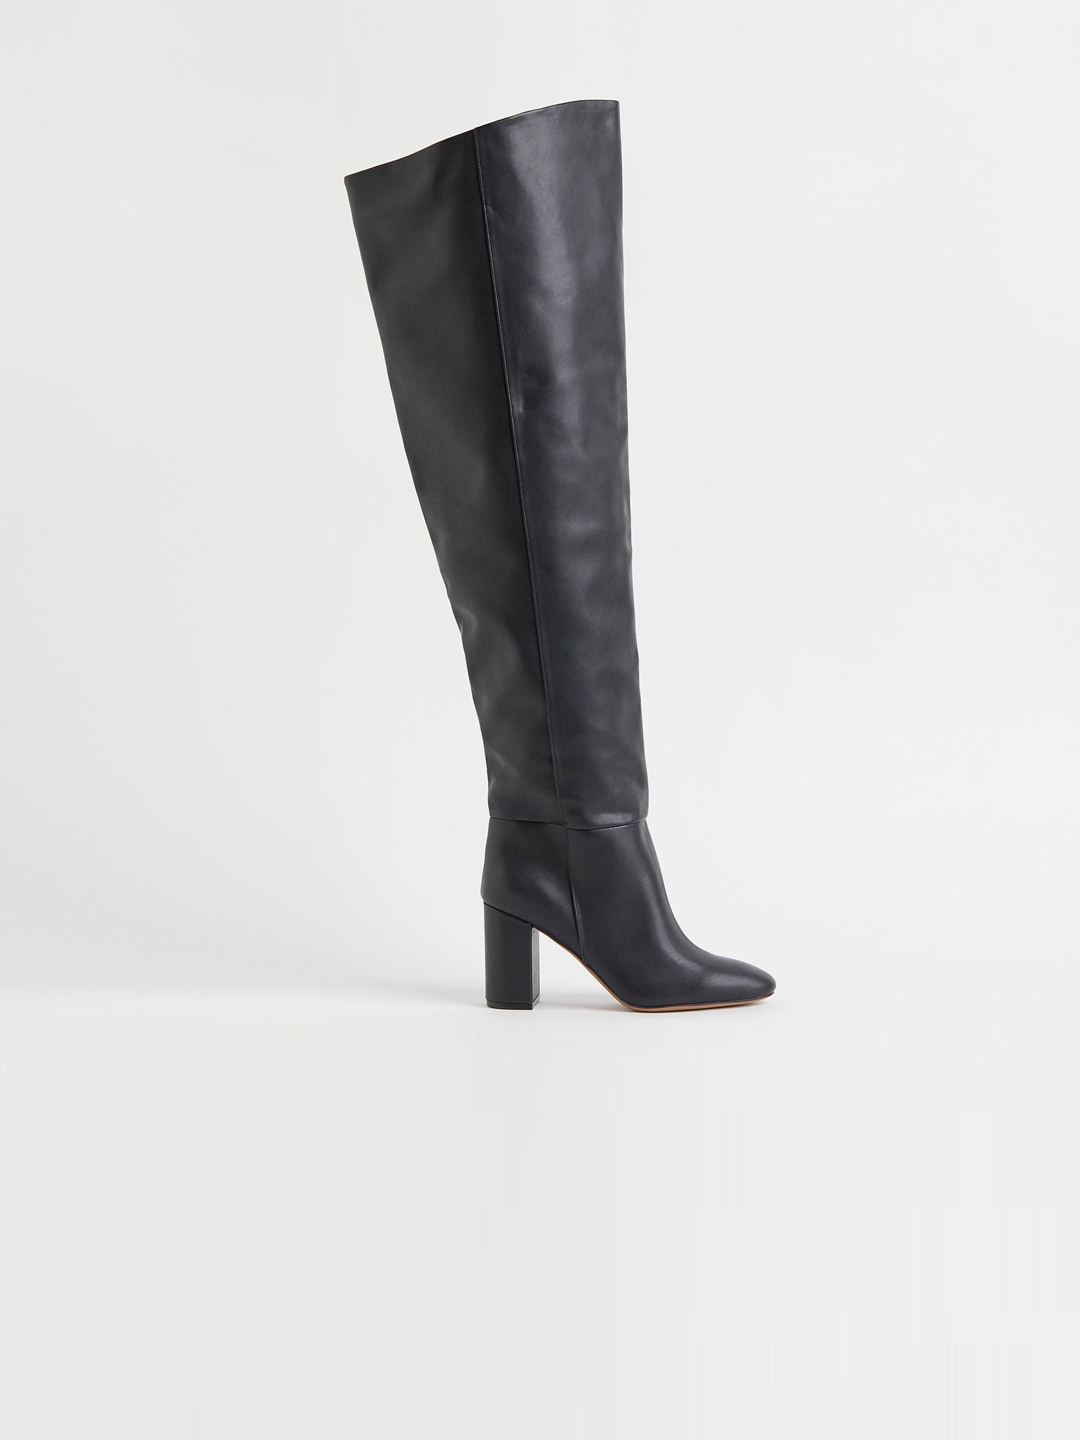 H&M Women Black Long Boots Price in India